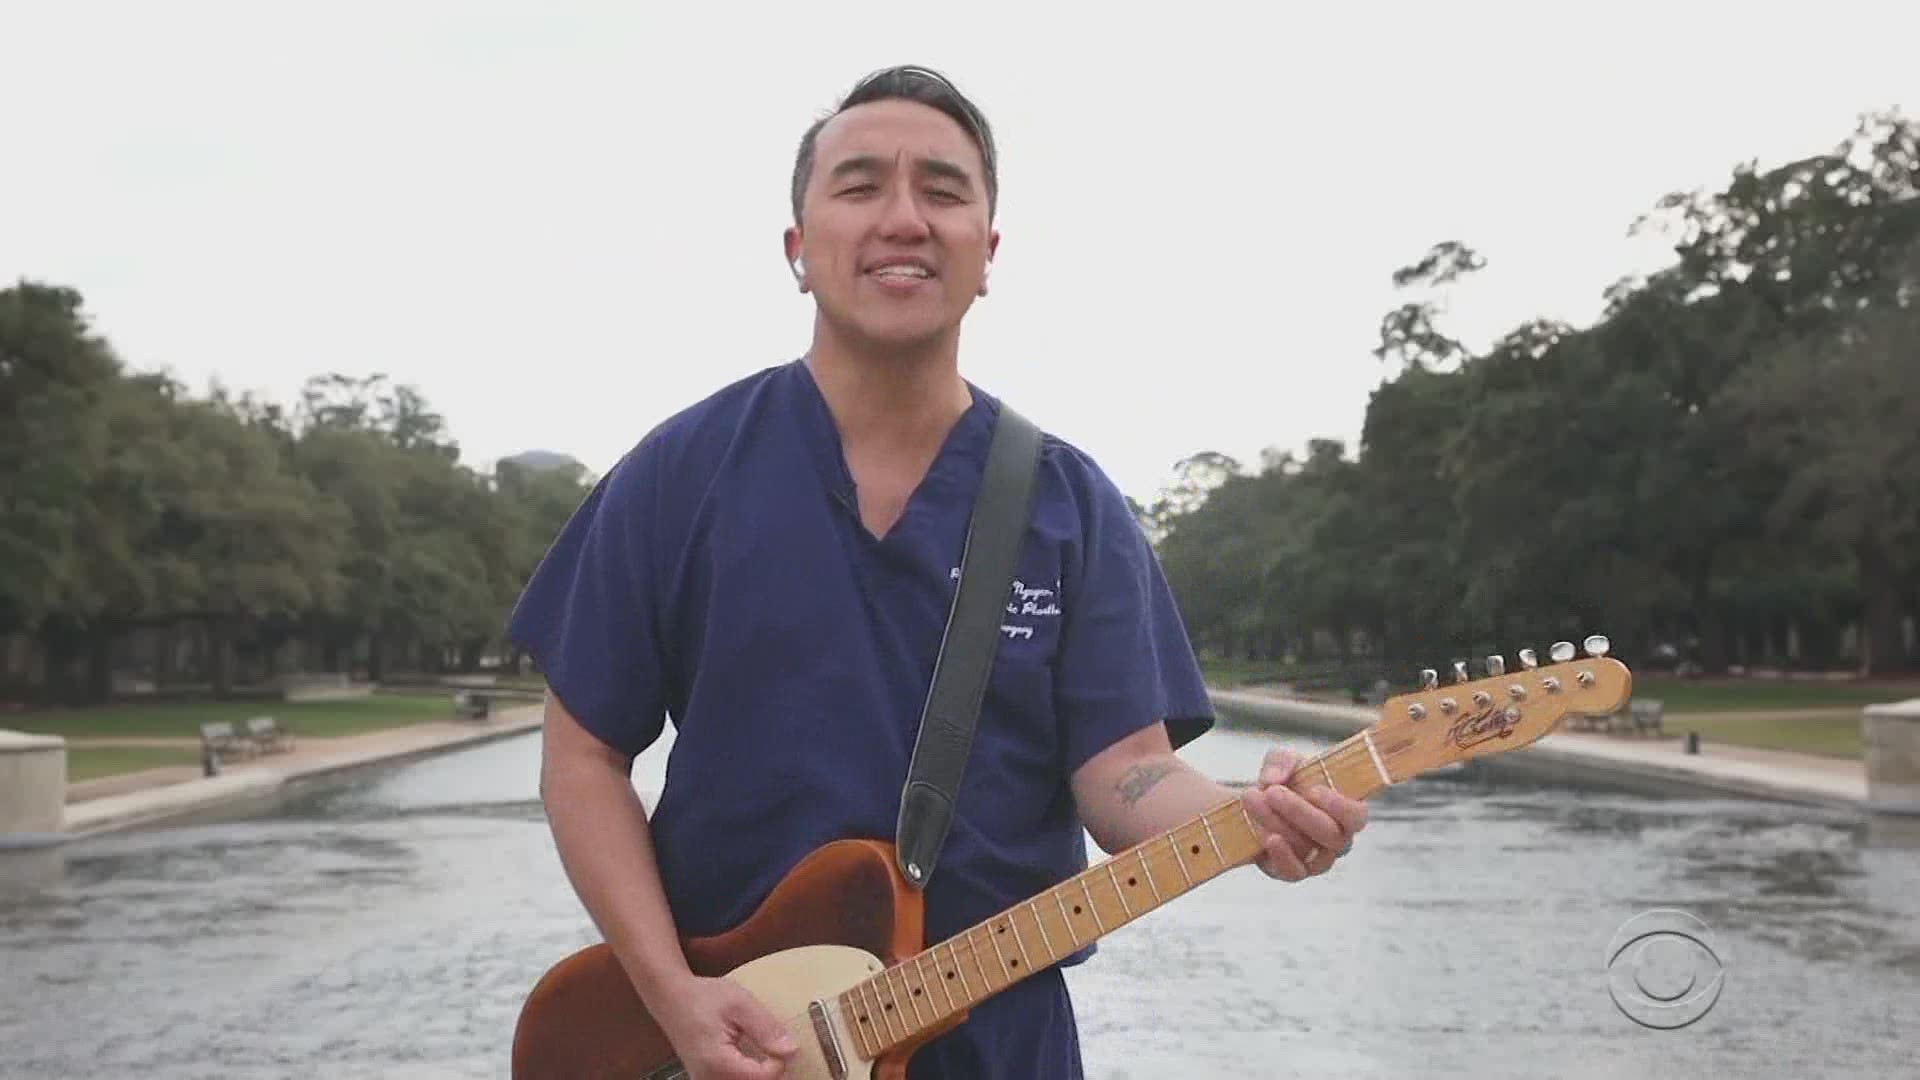 Dr. Phuong Nguyen, with UT Health, was one of the singers featured in the virtual tribute to healthcare heroes.